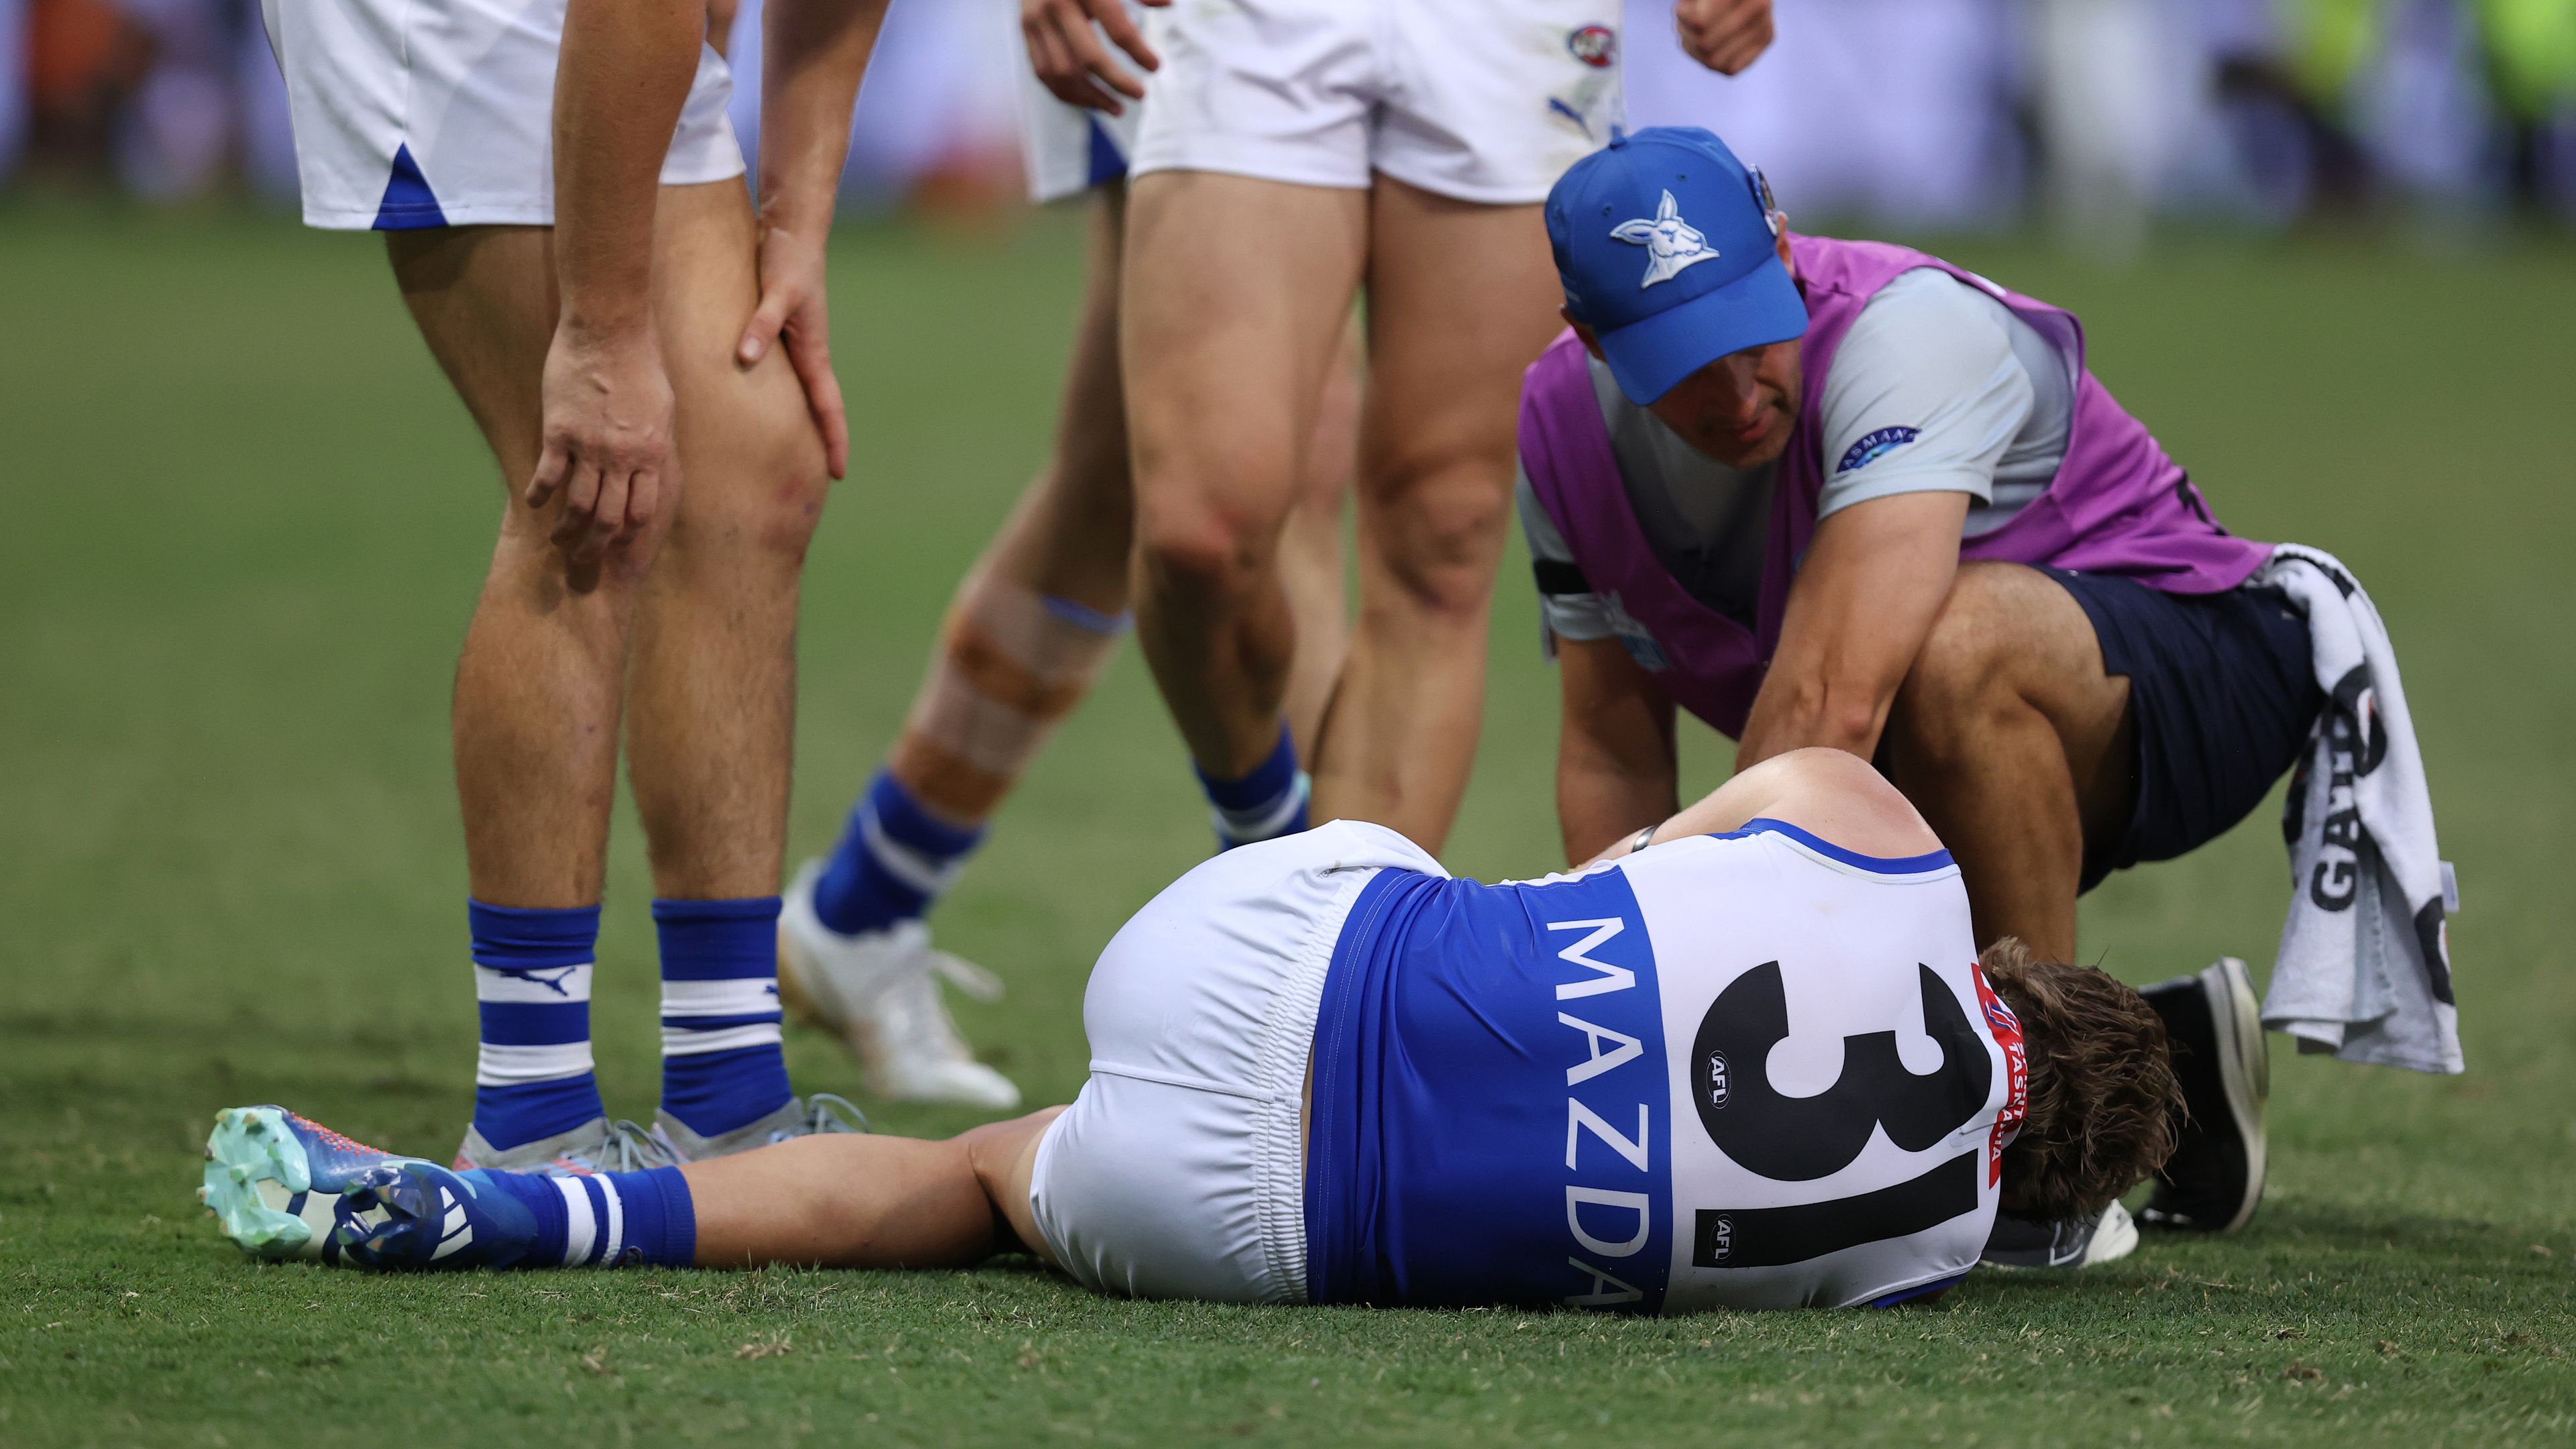 North Melbourne young gun 'distraught' after suffering season-ending injury